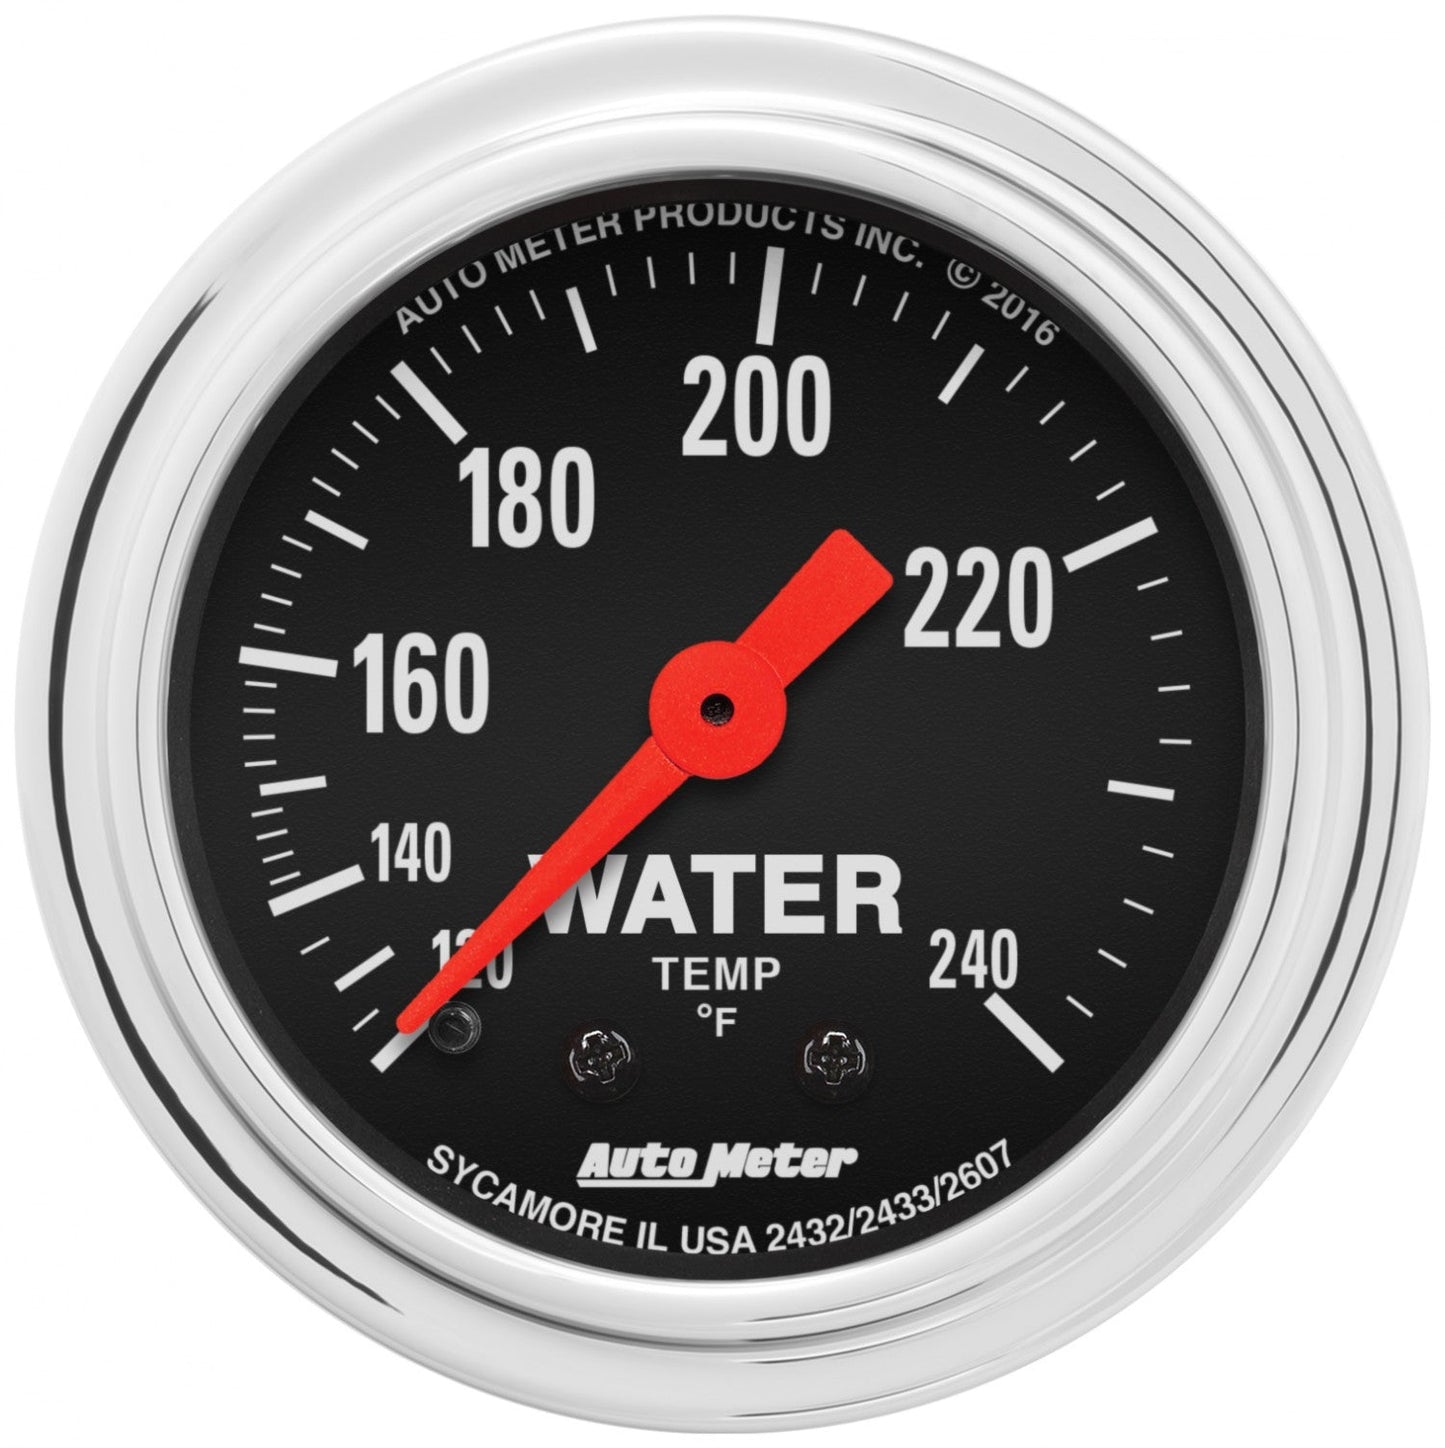 AutoMeter - 2-1/16" WATER TEMPERATURE, 120-240 °F, 6 FT., MECHANICAL, TRADITIONAL CHROME (2432)